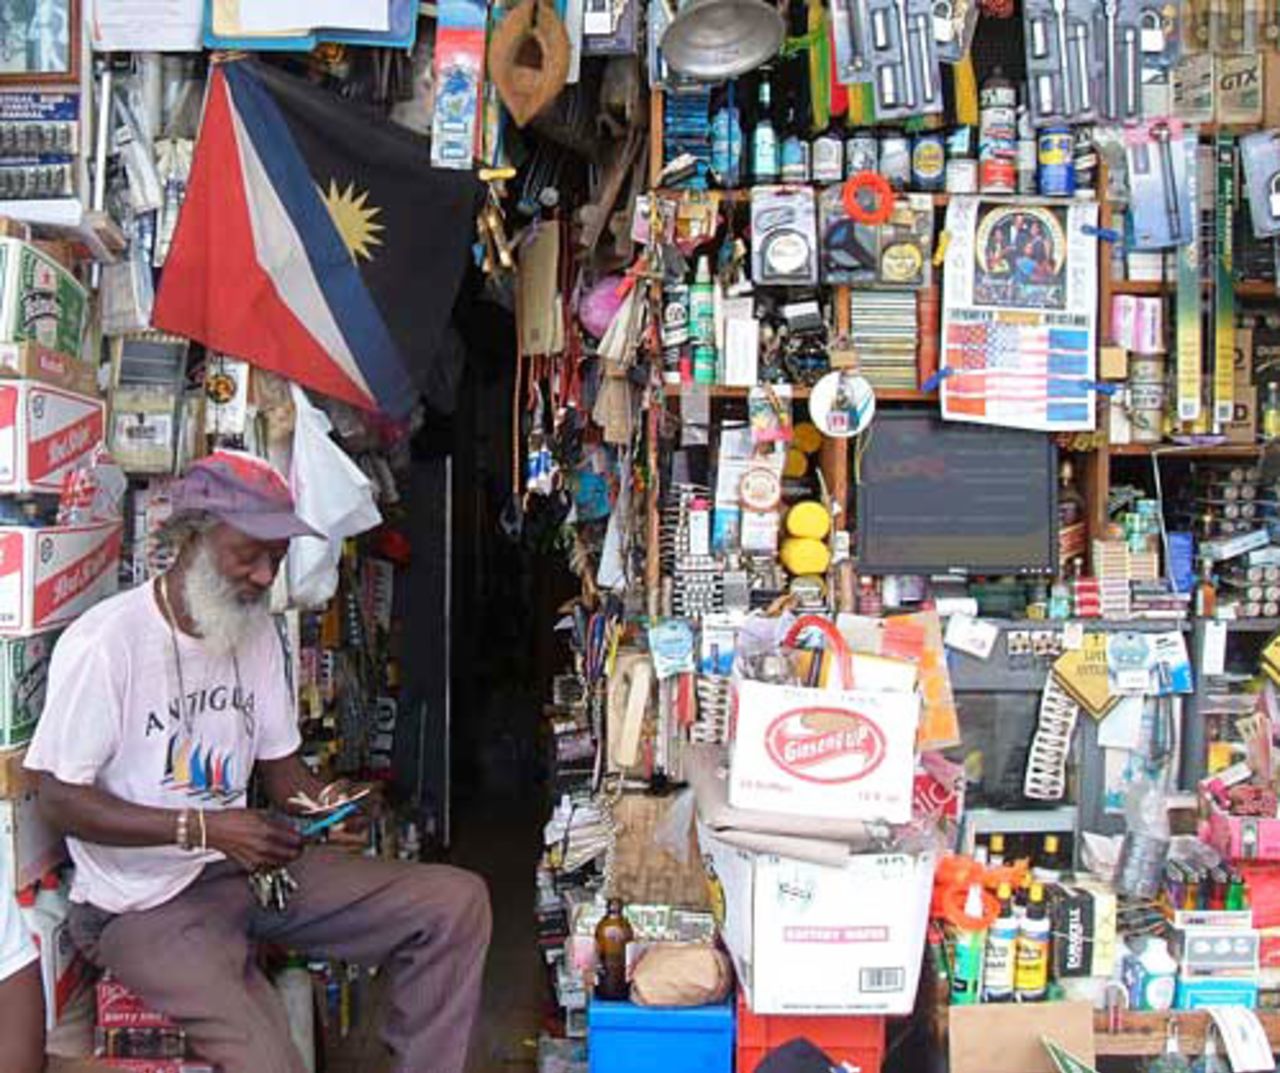 Gravy sits in his store, Antigua, February 11, 2009